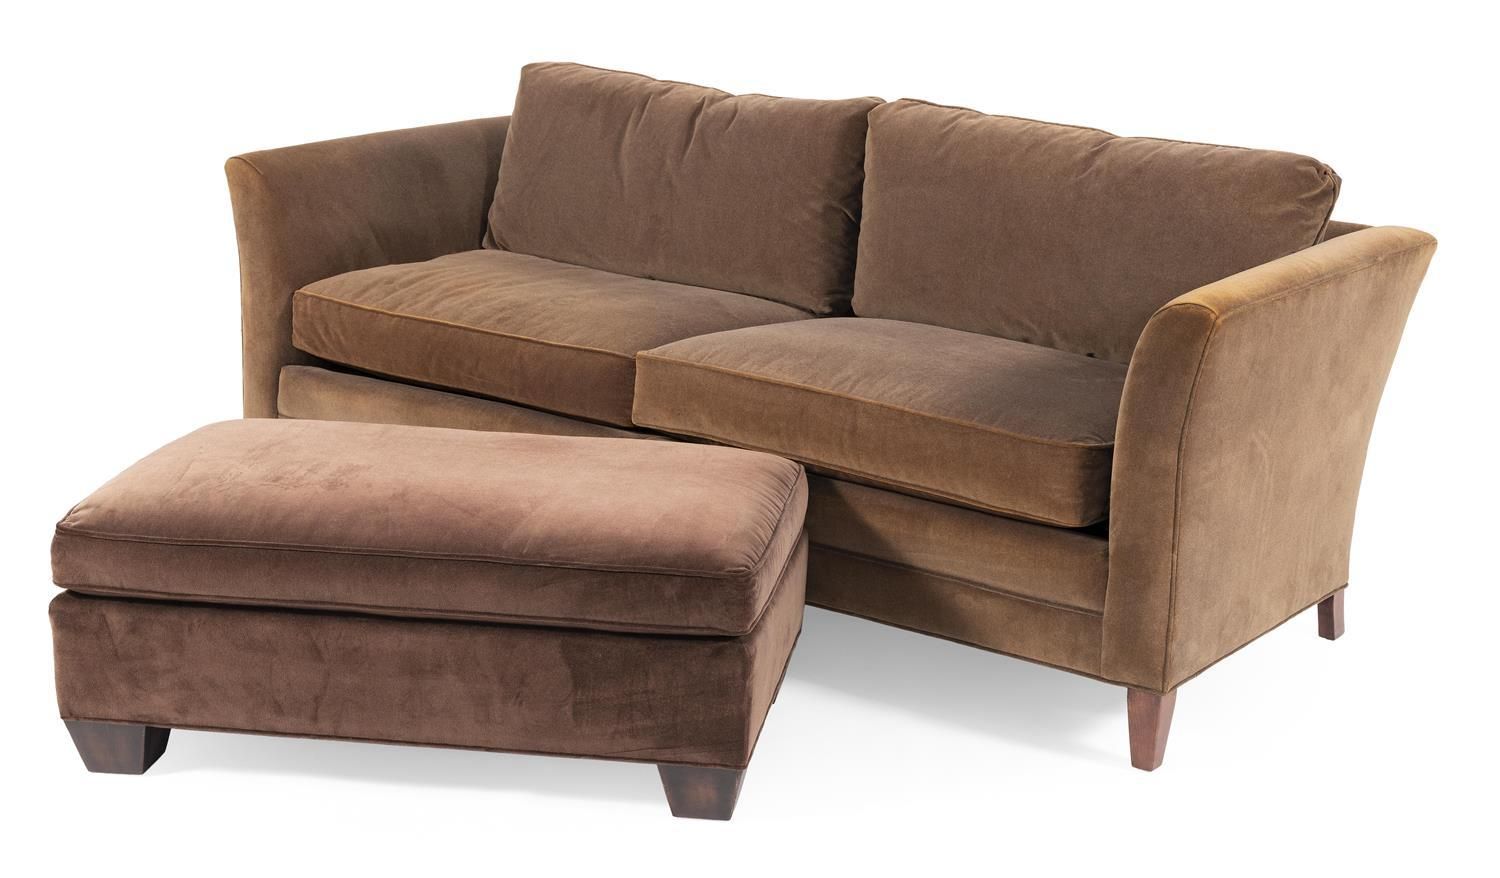 Lot – Stickley Two Cushion Sofa And Matching Ottoman Upholstered In In Sofas With Ottomans In Brown (View 10 of 20)